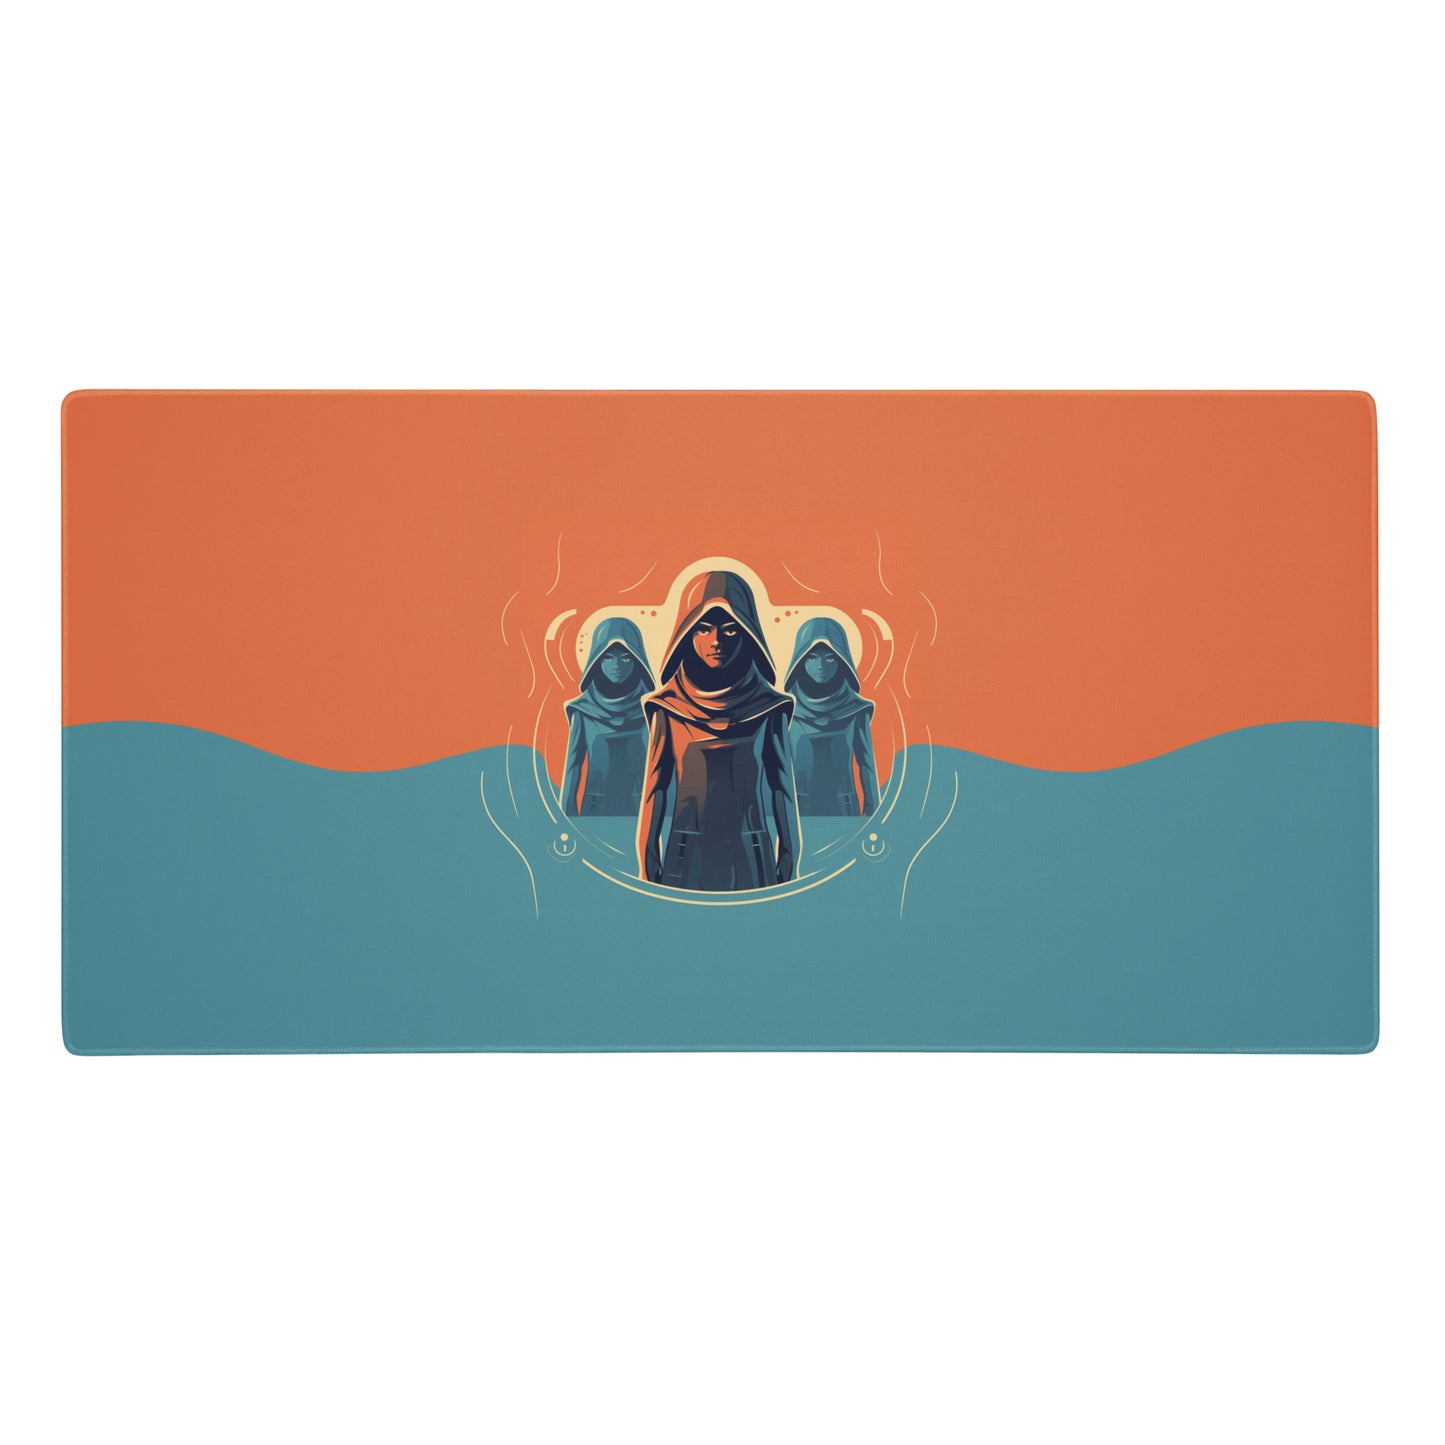 A 36" x 18" orange and blue desk pad with three robed figures.